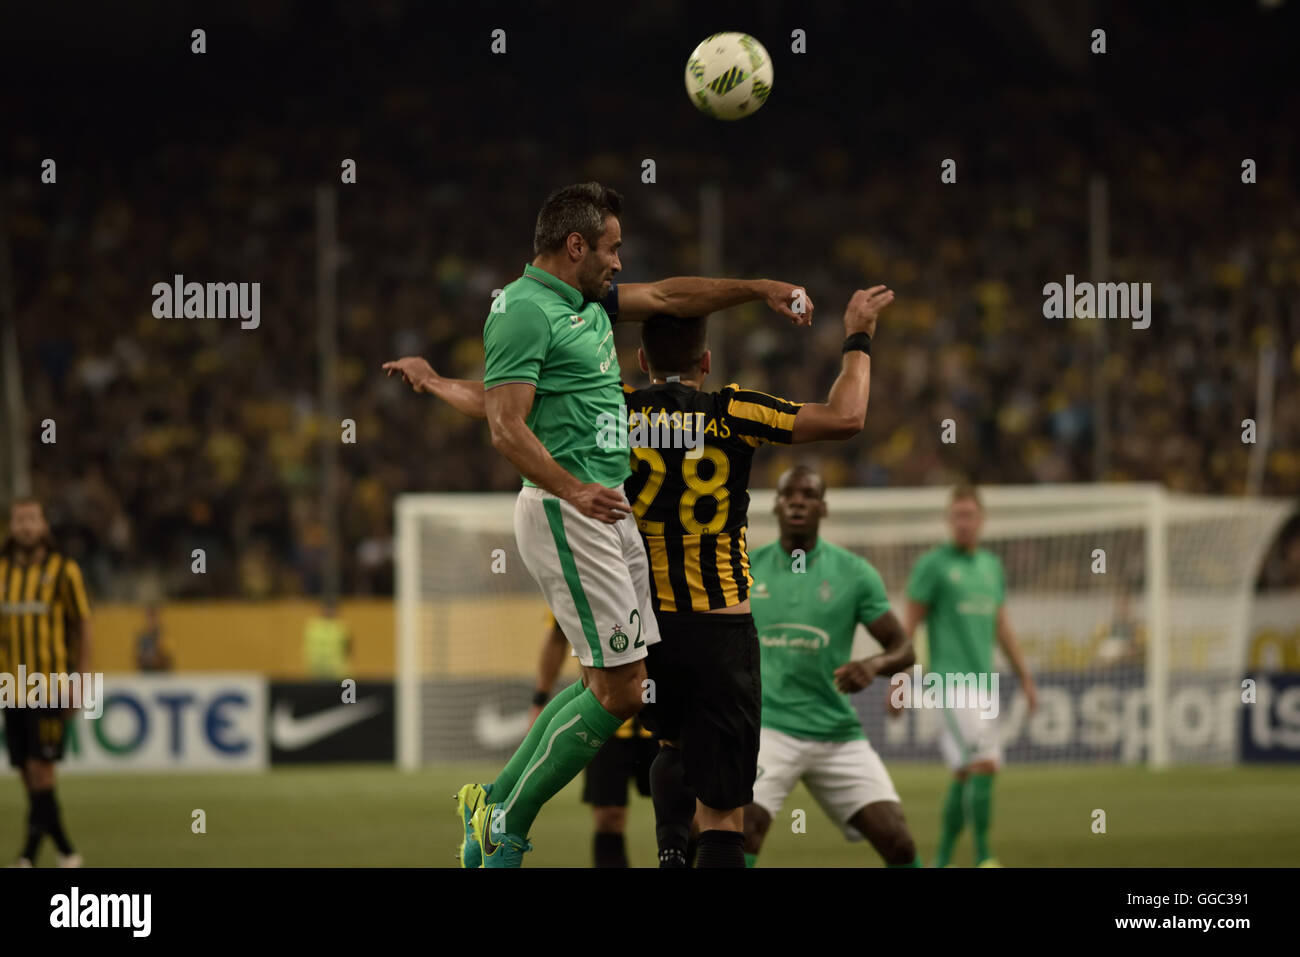 Athens, Greece. 04th Aug, 2016. The goal of Robert Berits in the 22nd minute in OAKA was enough for the french football team Saint-Etienne (green and white appearance) to earn the qualification against the greek football team AEK (yellow and black appearance), despite the fact that the greek team was better in most duration of the game, but encountered a serious problem in the final effort.Final effort. Final score AEK- 0, while Saint Etienne got 1. © Dimitrios Karvountzis/Pacific Press/Alamy Live News Stock Photo